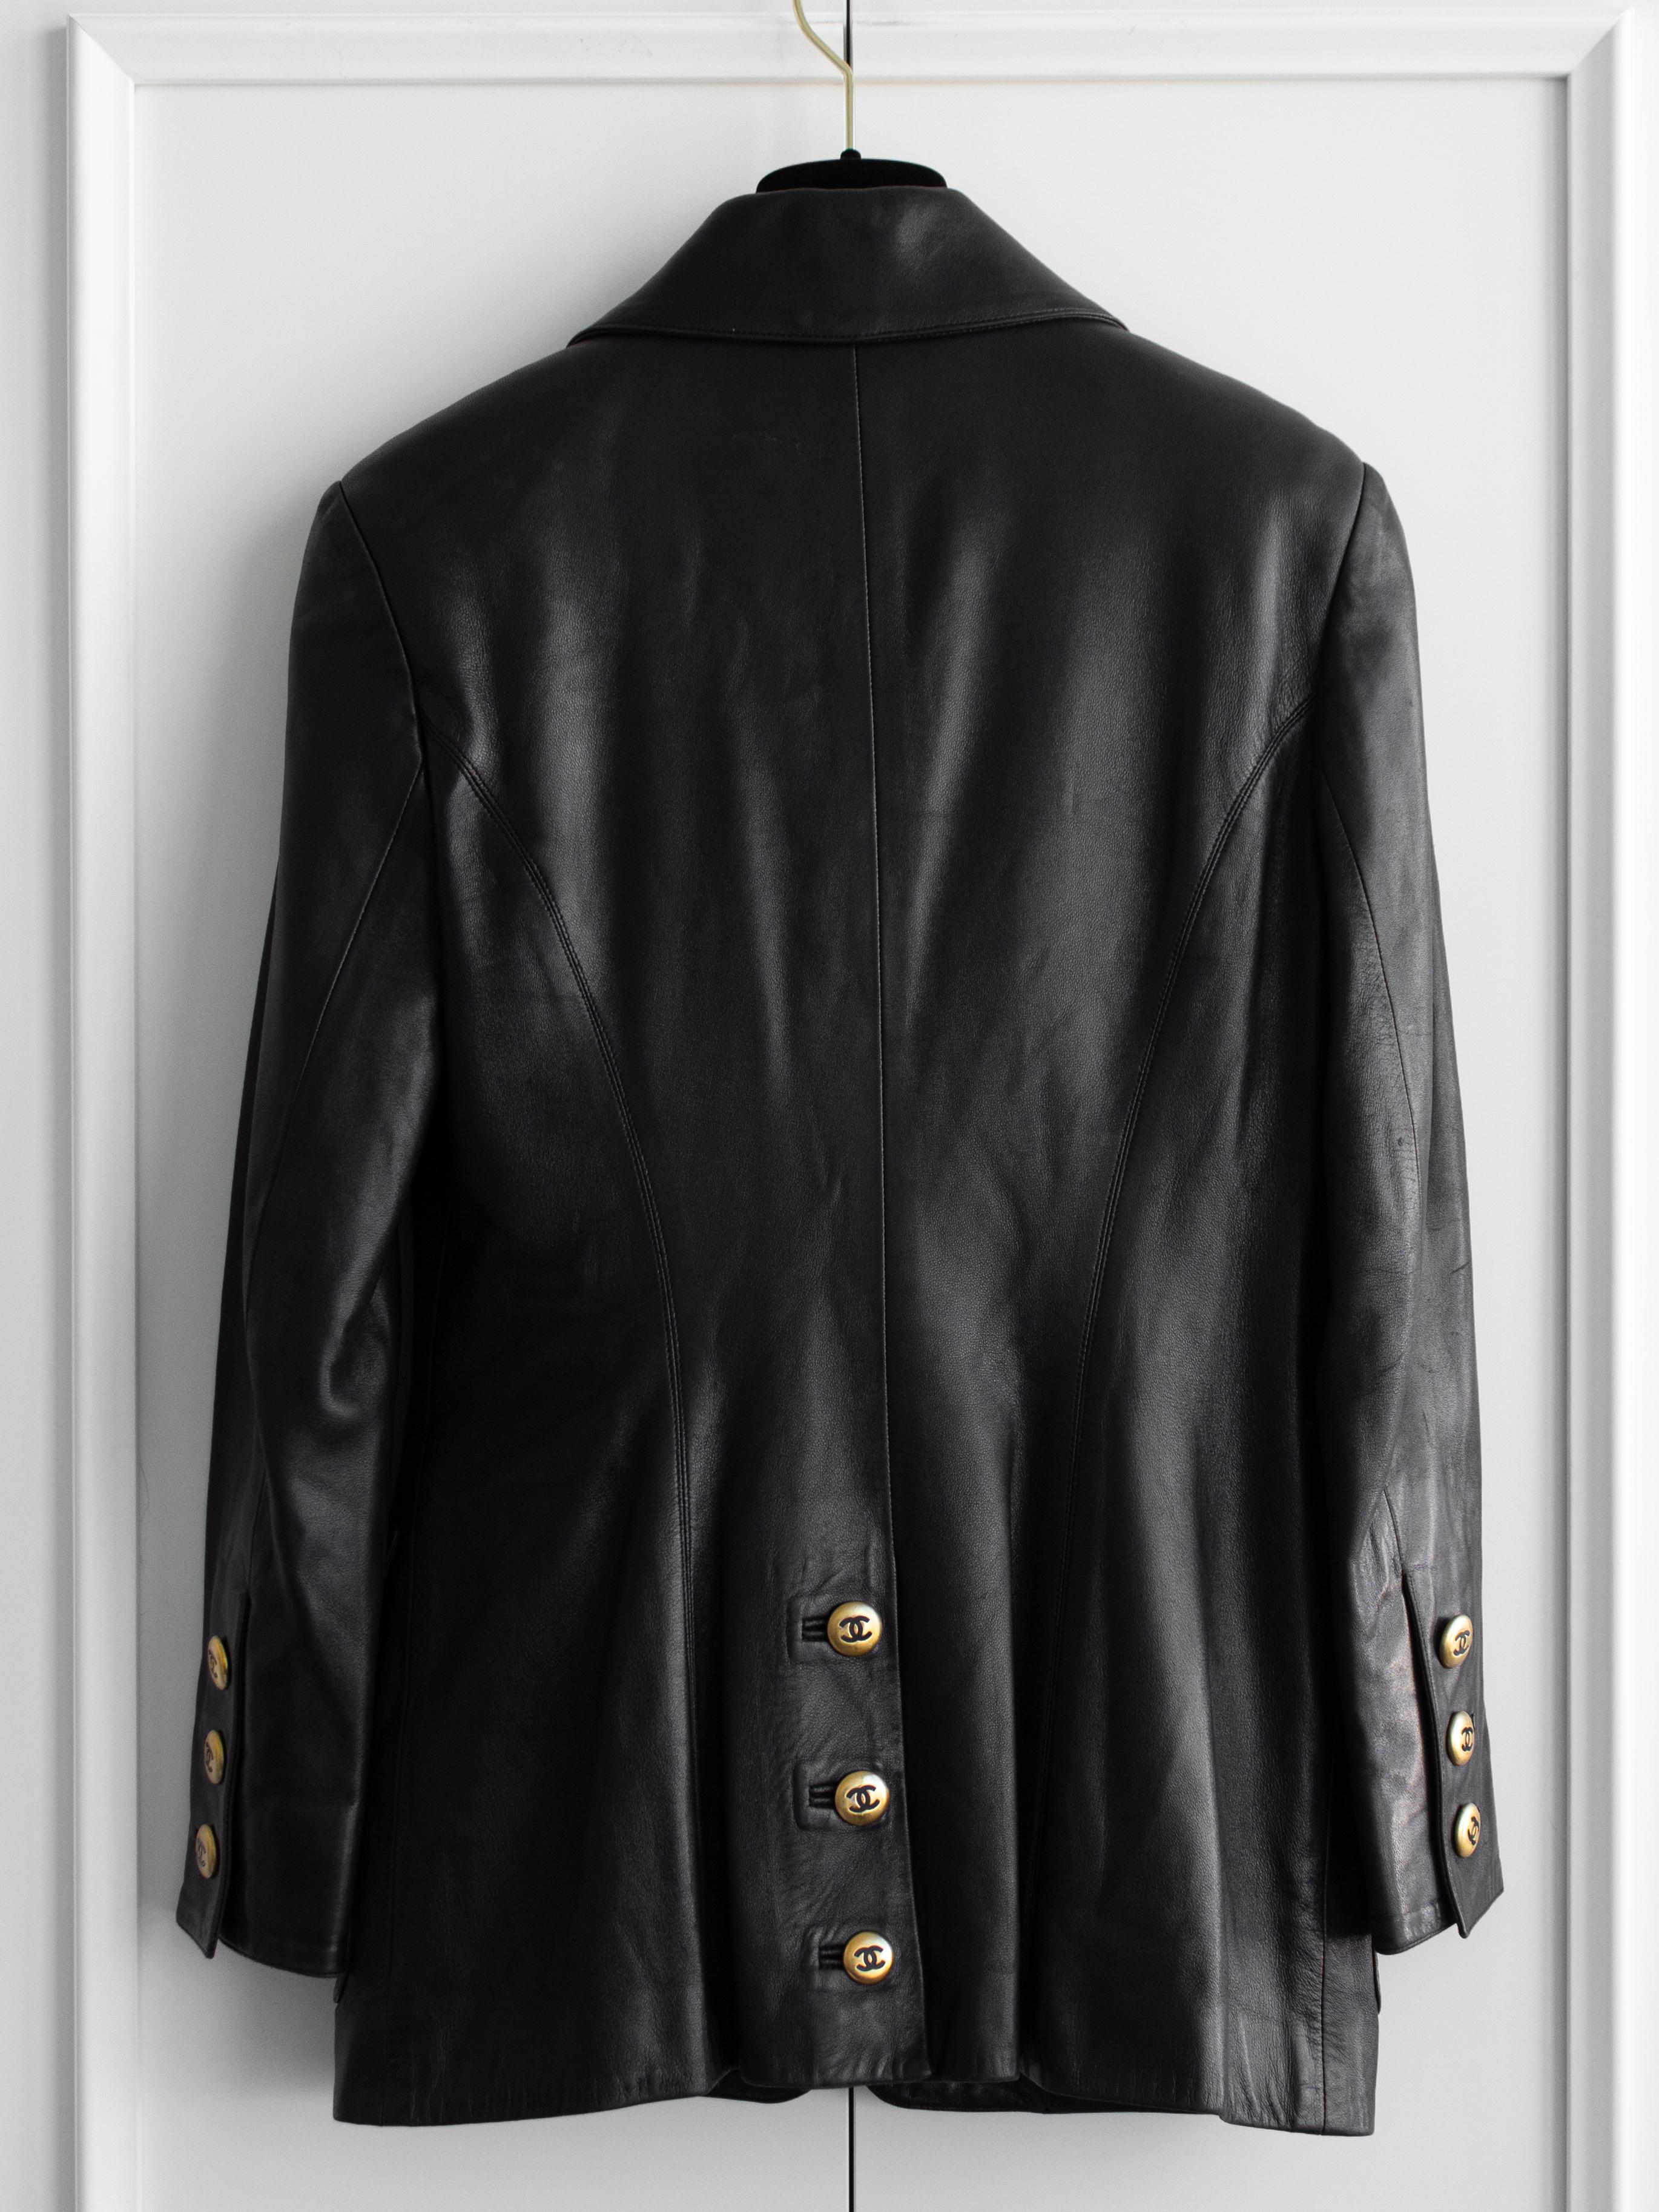 Iconic Chanel Vintage F/W 1992 Black Gold CC Lambskin Leather Suede Jacket 1